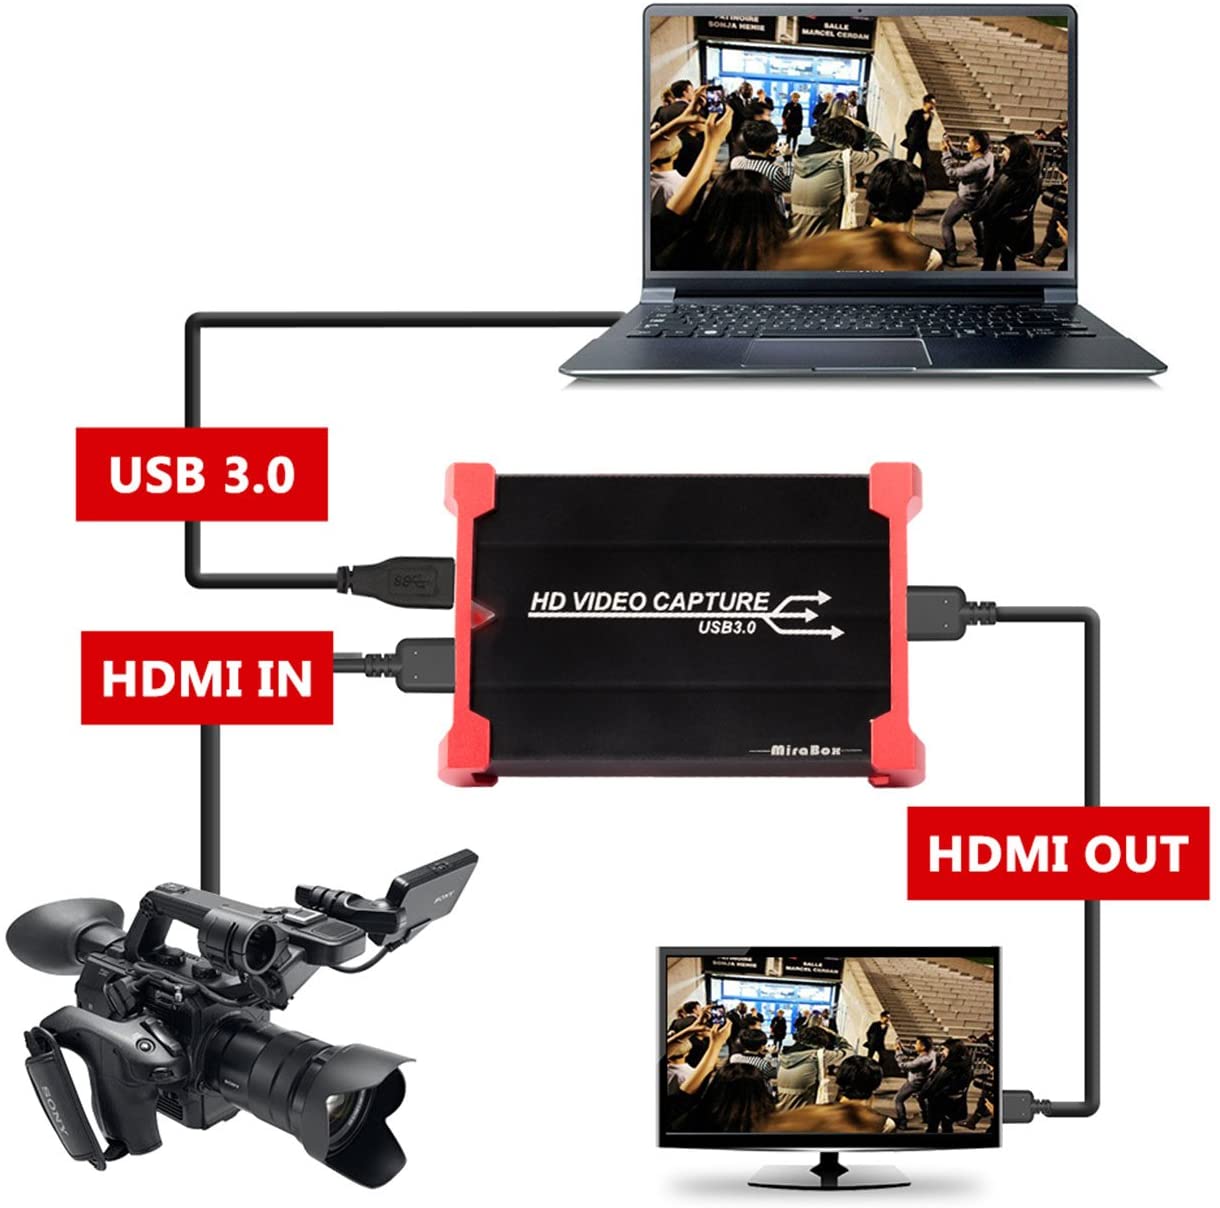 Mirabox USB 3.0 HDMI Vide Capture Card for Live Streaming